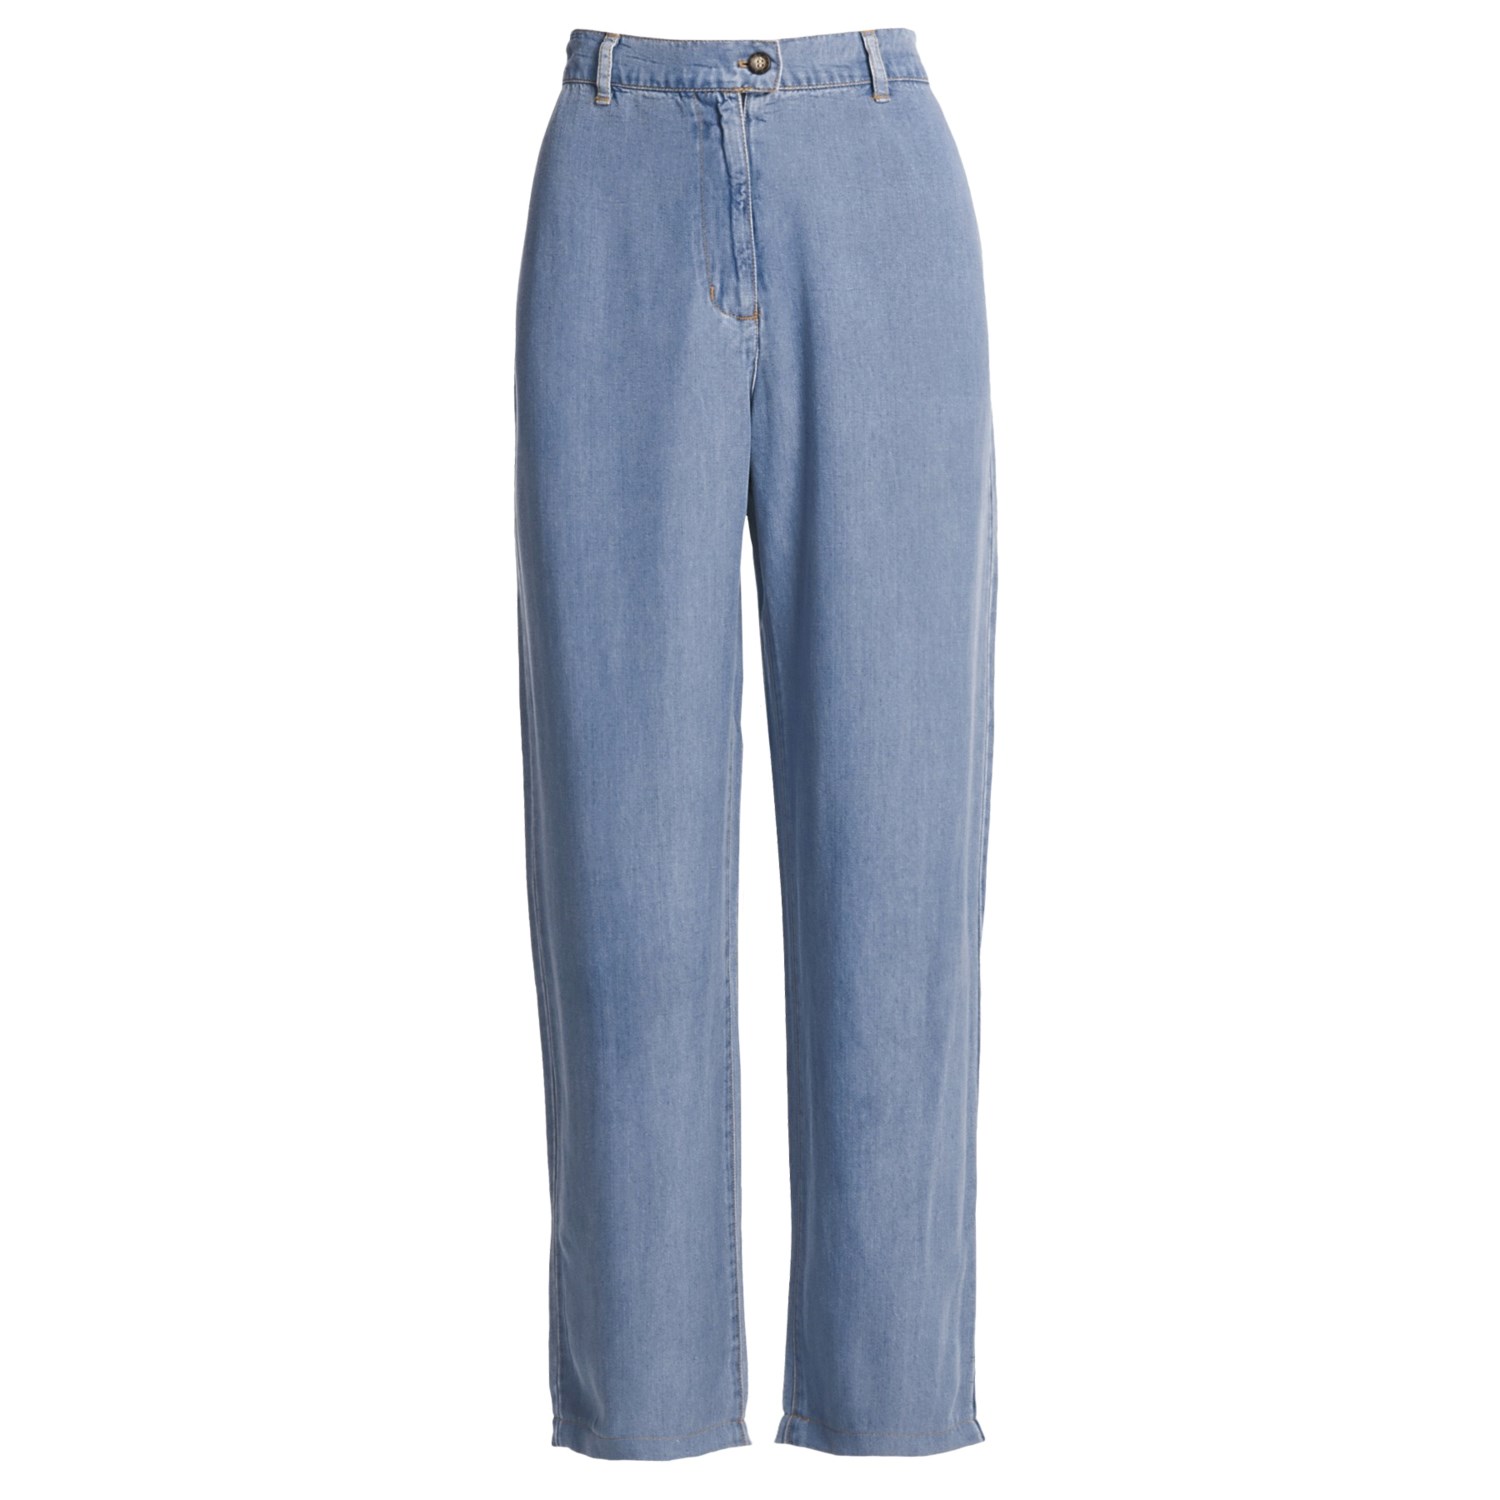 Pulp Rayon Flat Front Jeans (For Women) - Save 79%